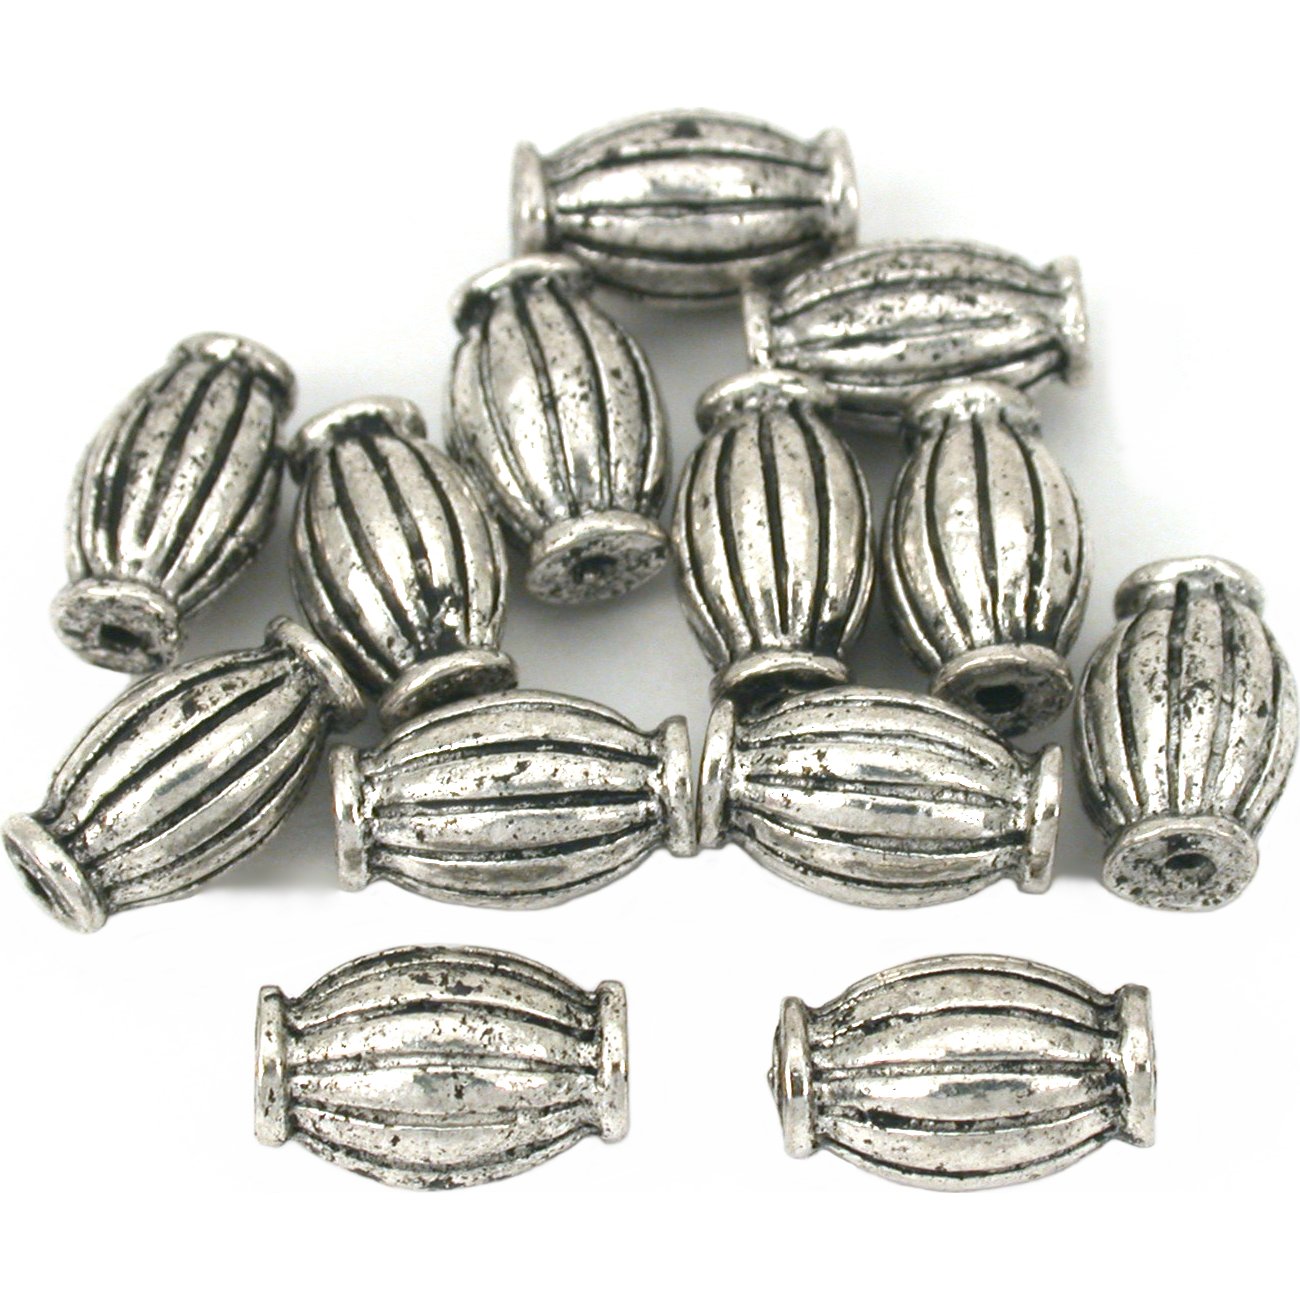 Bali Fluted Tube Beads Antique Silver Plated 9.5mm 14Pcs Approx.